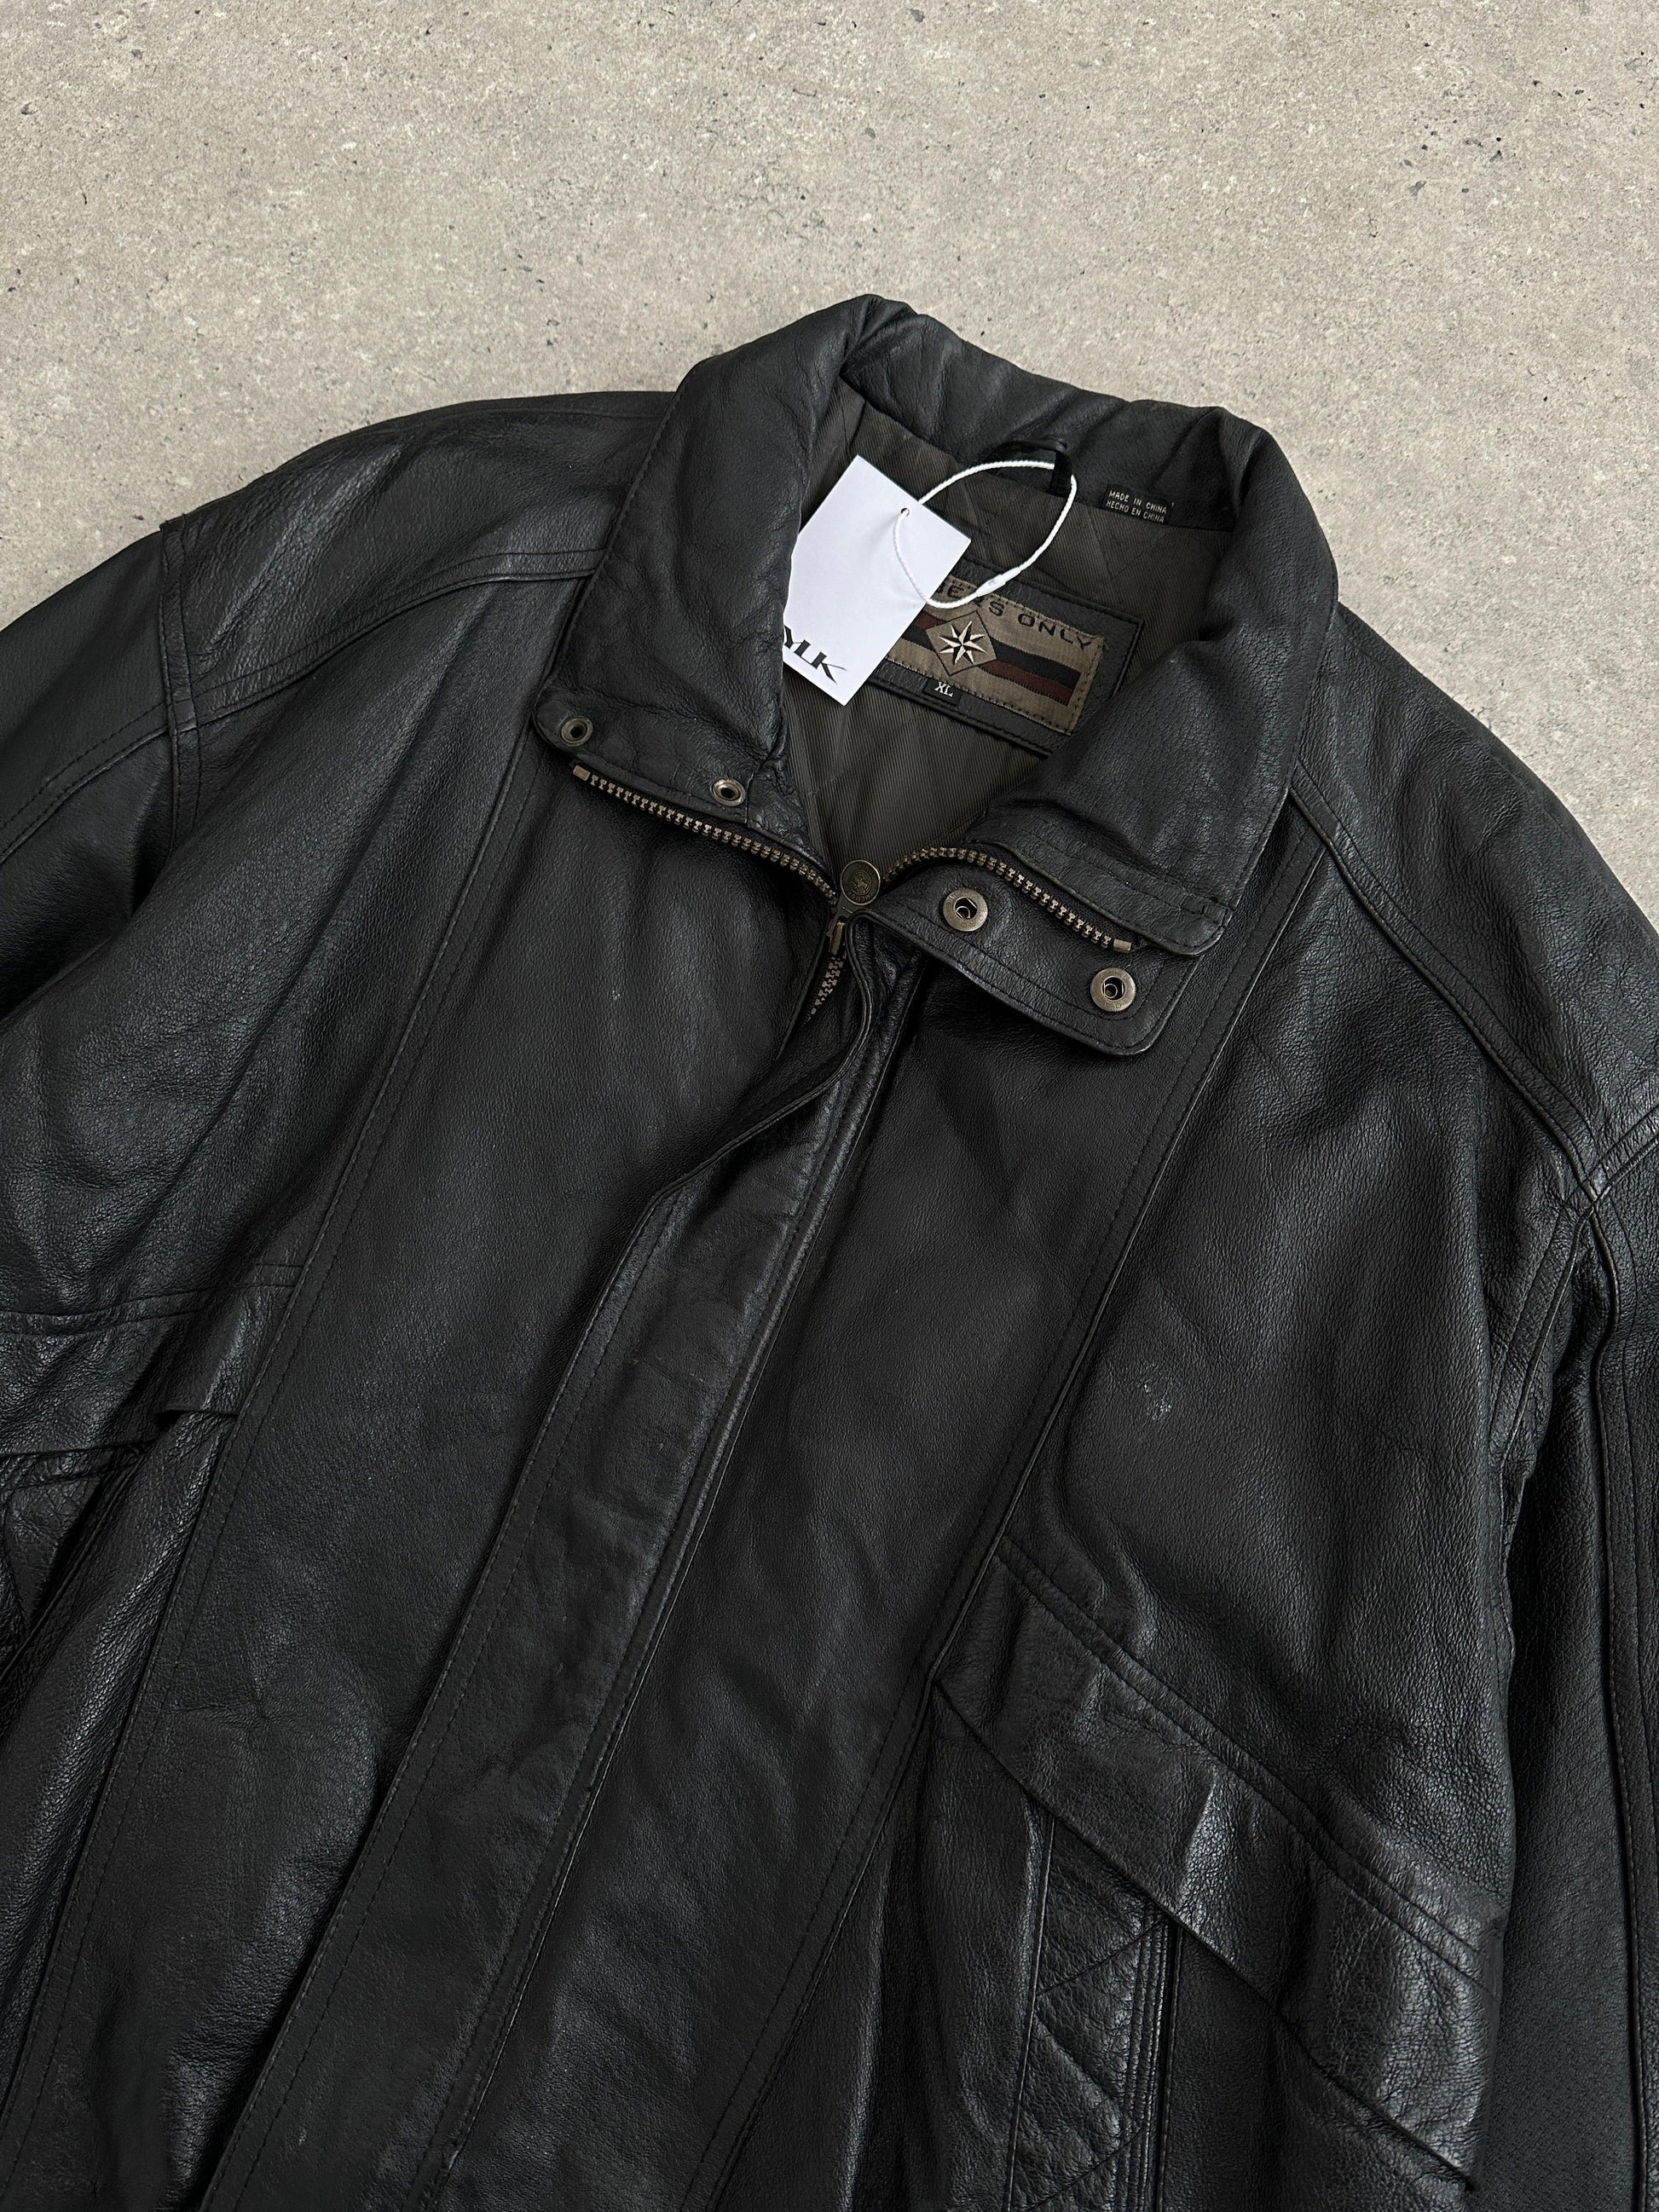 Vintage Leather Bomber Jacket - XL - Known Source